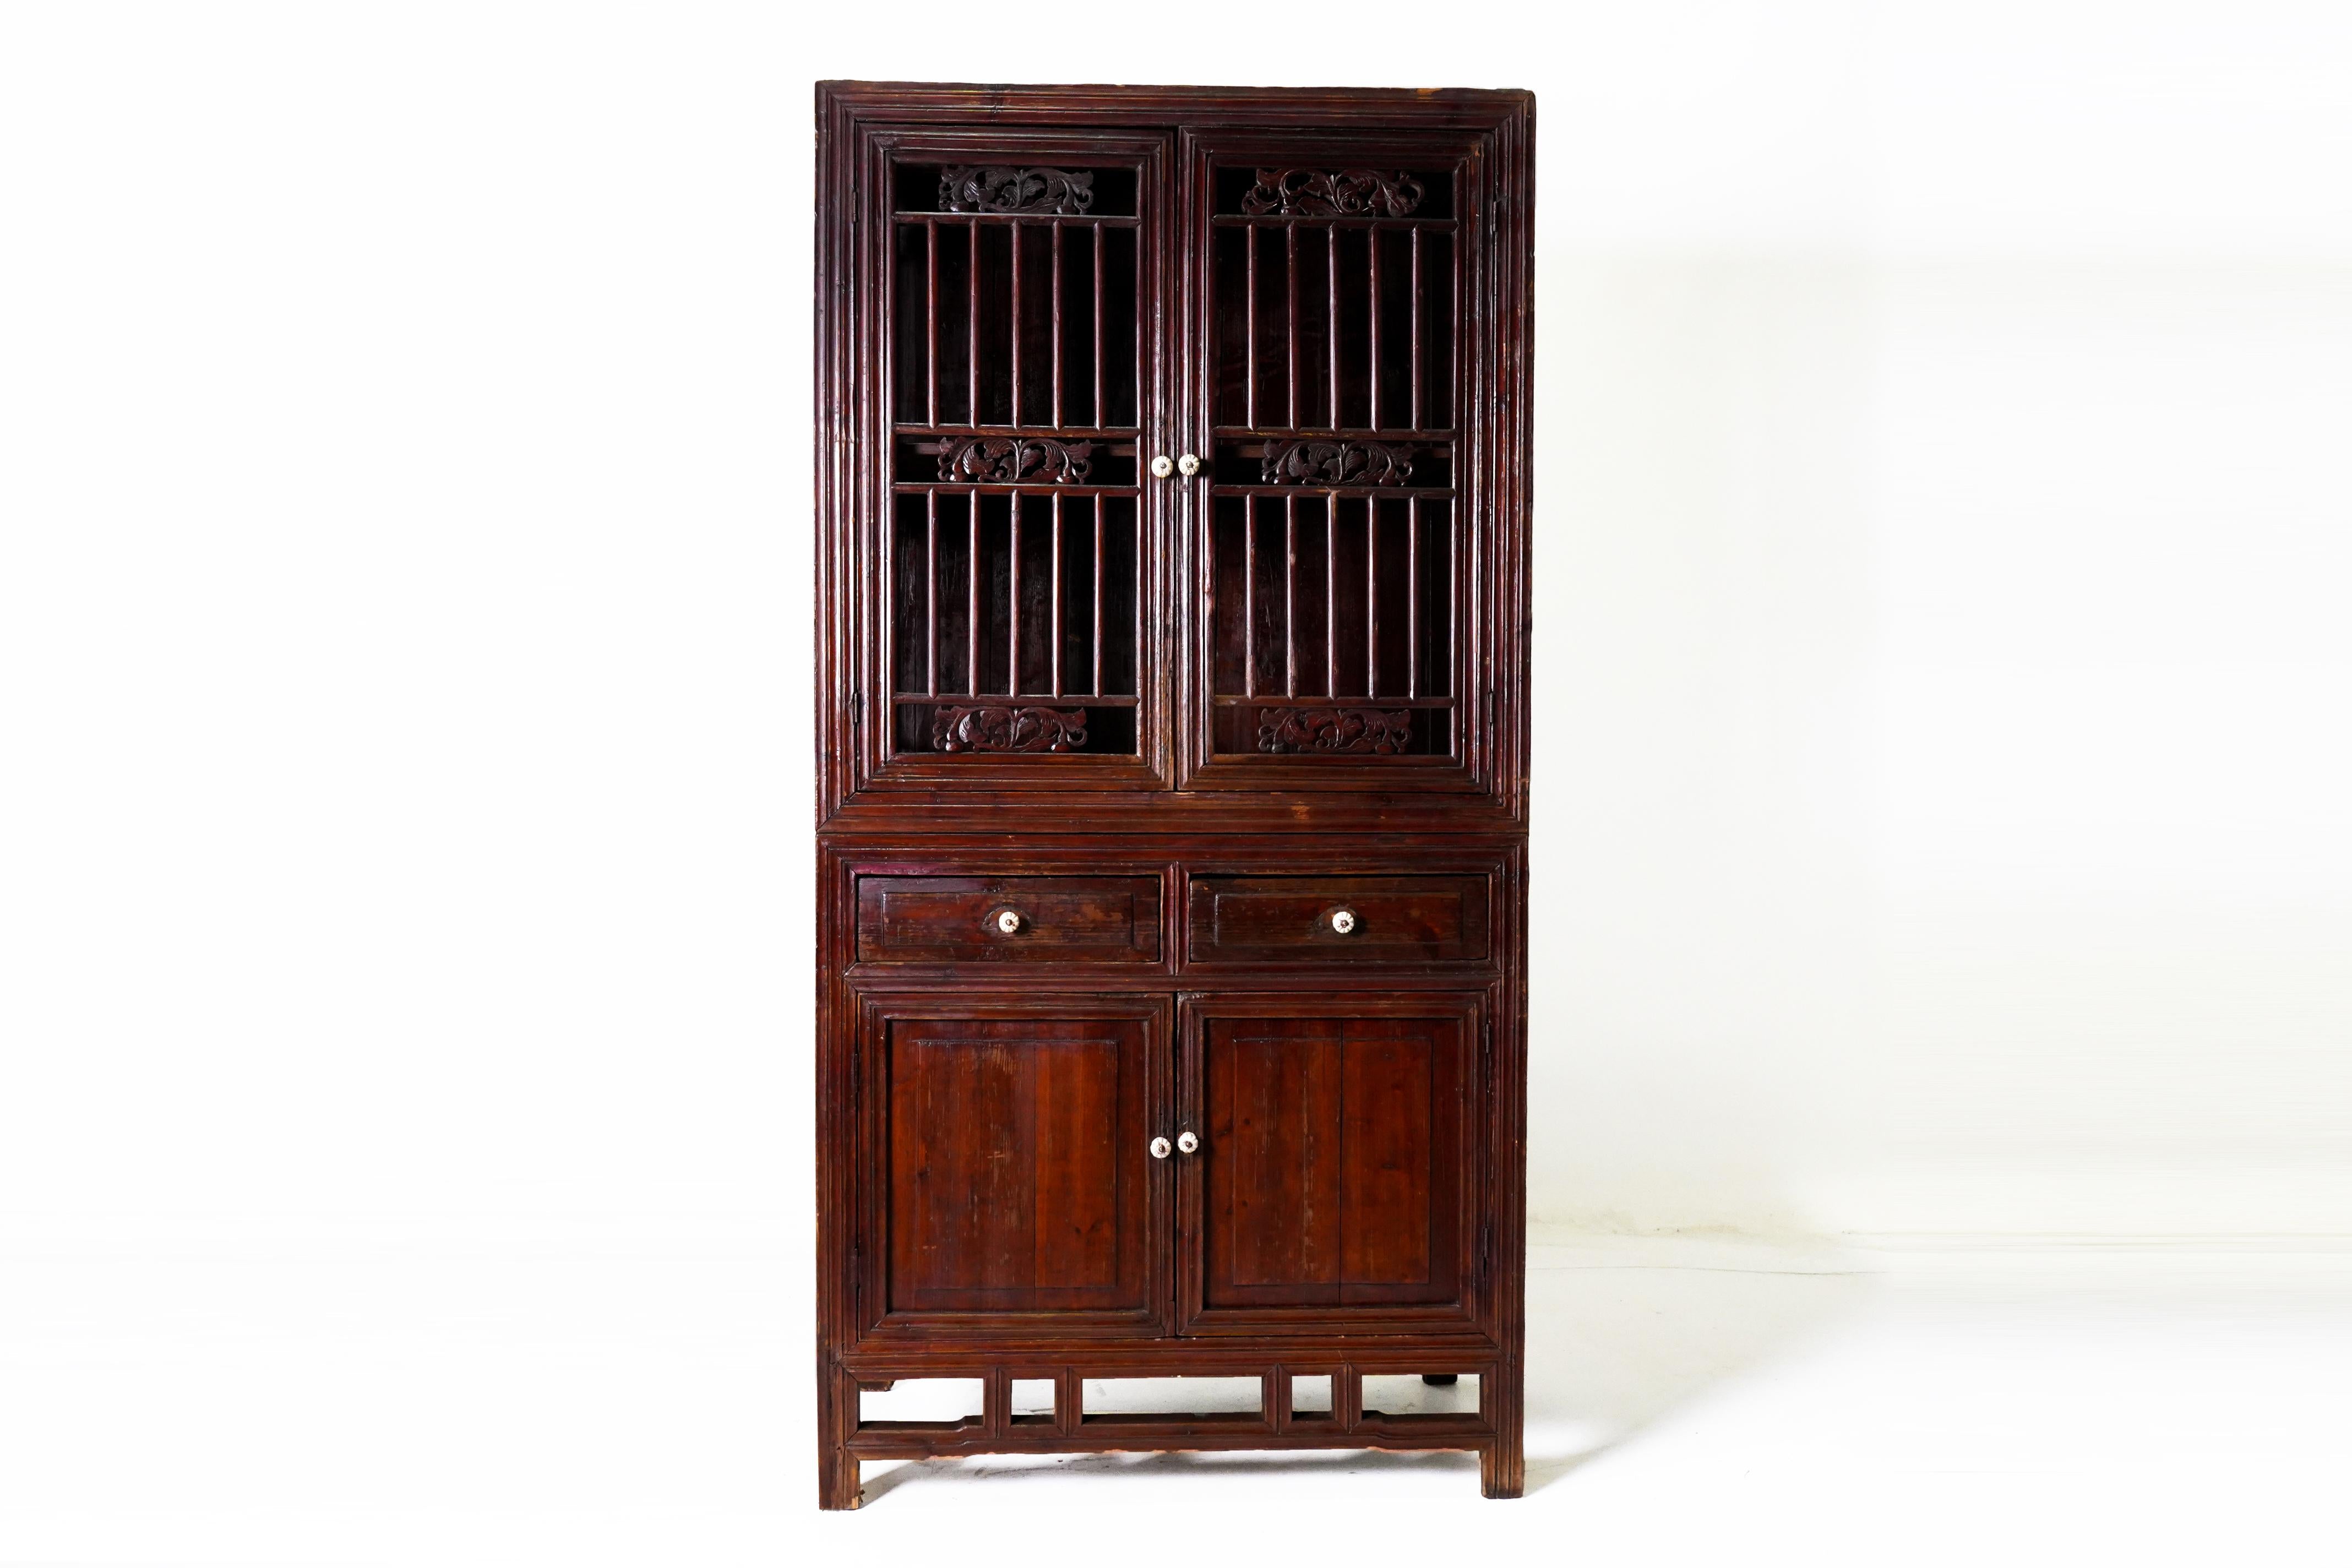 This Chinese kitchen cabinet is made from Chinese Cypress Wood and covered in a protective coat of natural oxblood lacquer. The cabinet is made in two parts for easy movement between indoor and outdoor coking areas. The open lattice provides a